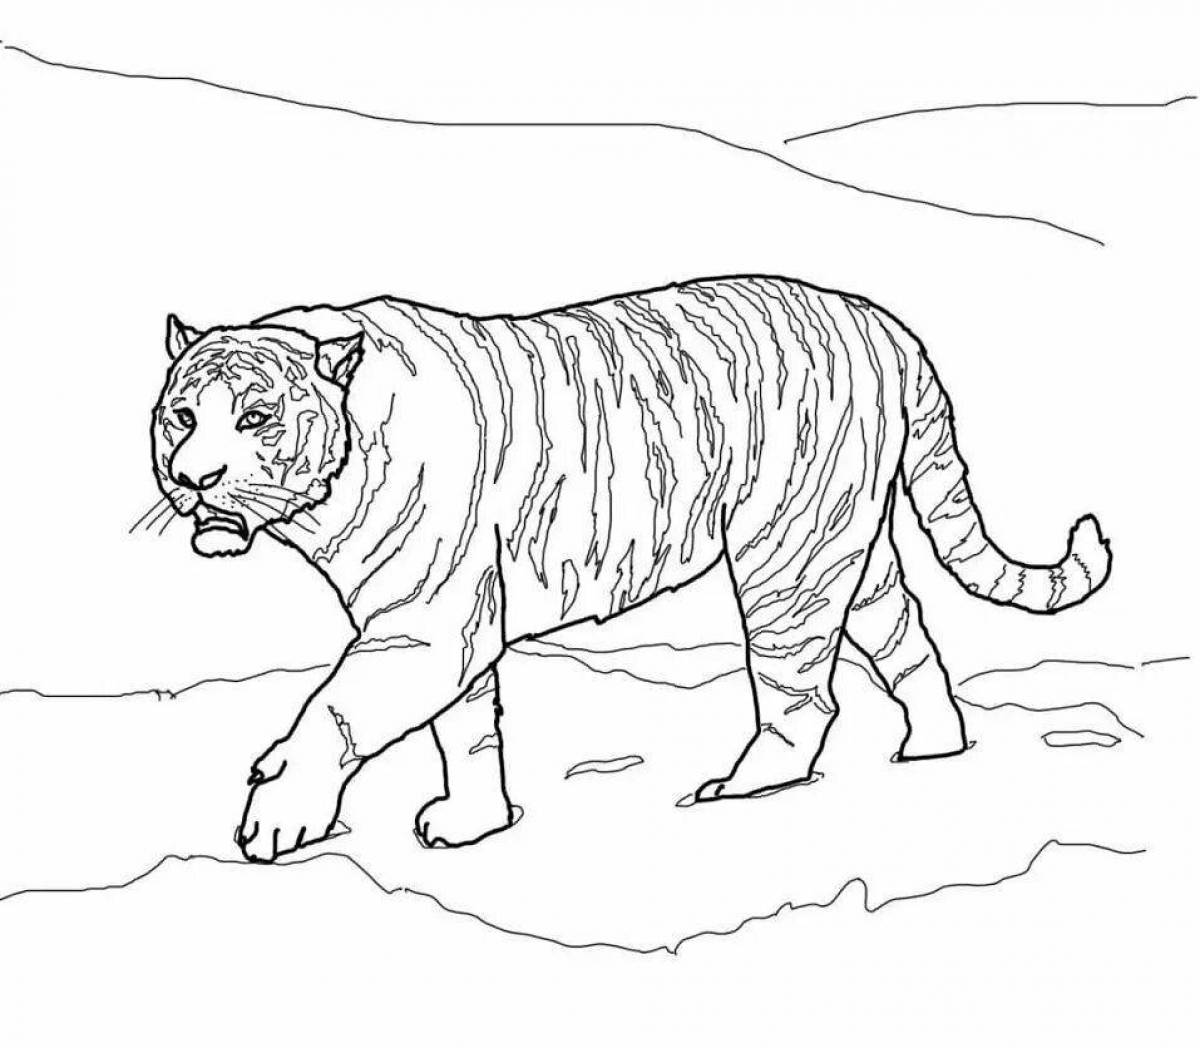 Dazzling animal coloring pages pdf